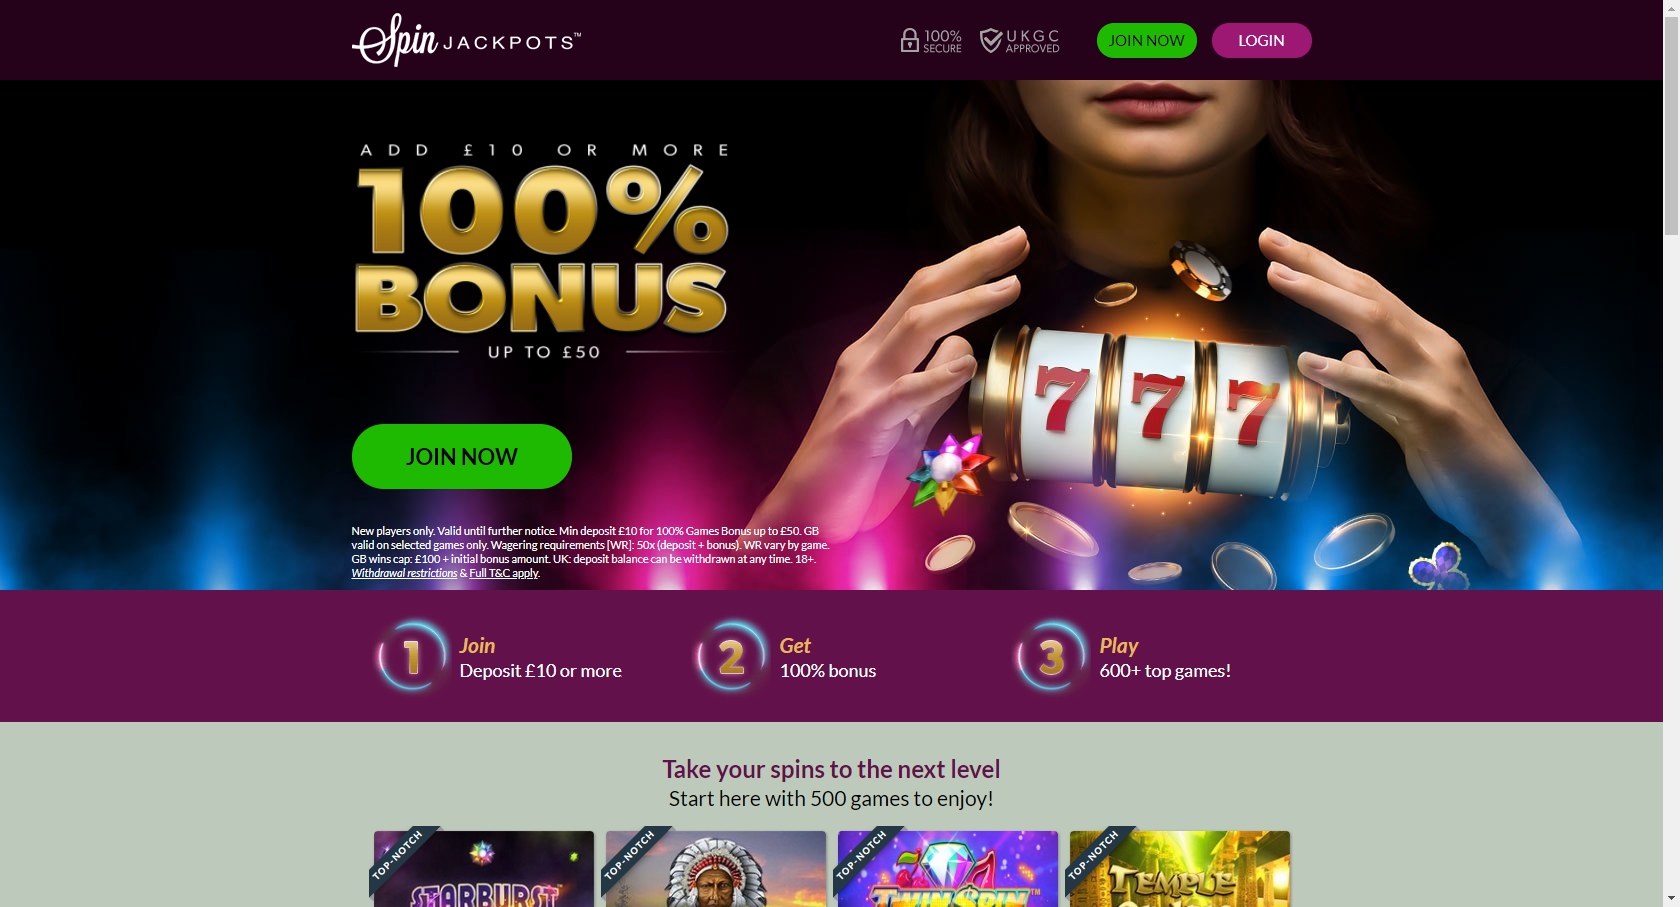 Spin Jackpots Casino Review